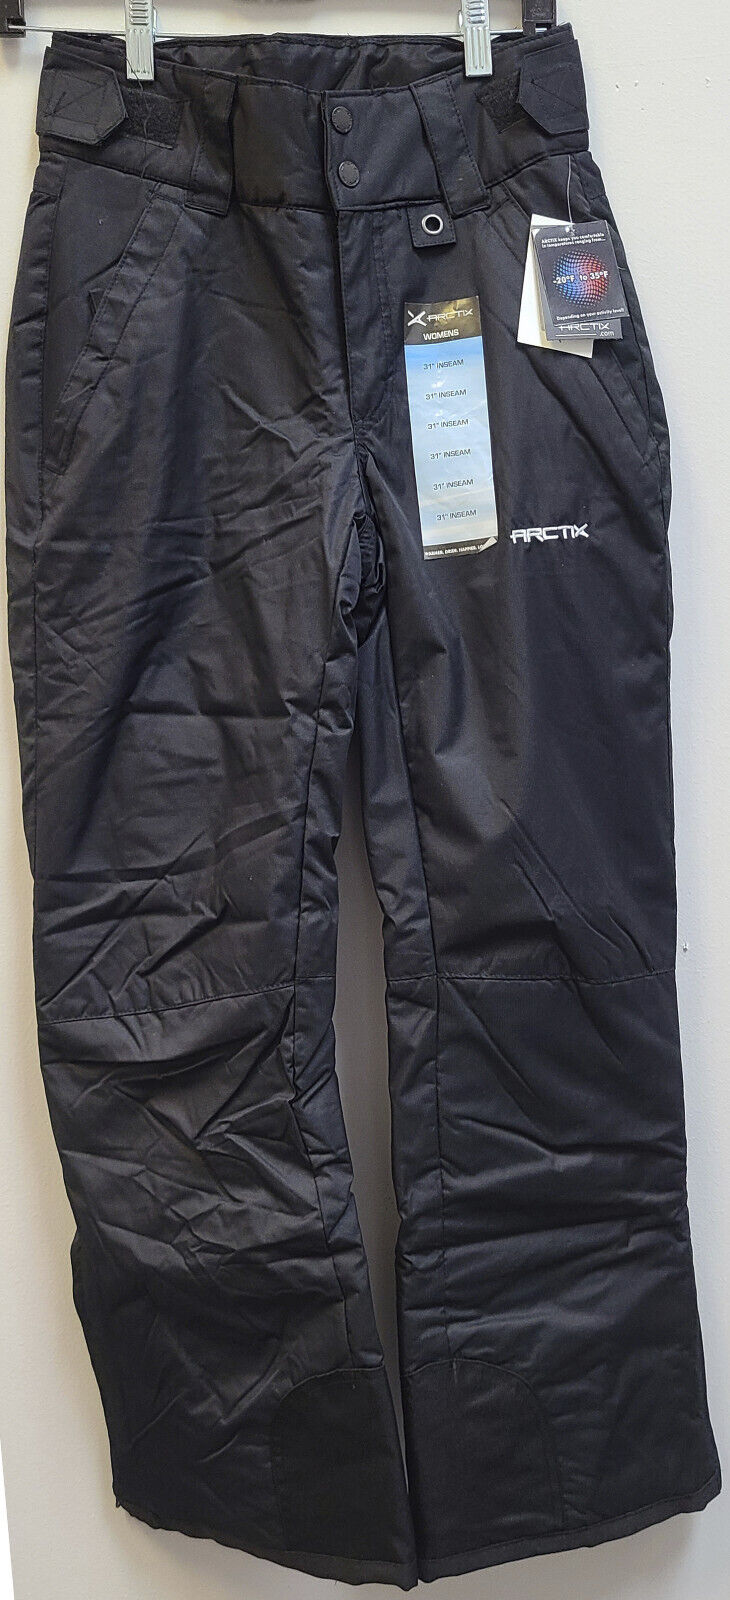 ARCTIX Women's INSULATED SNOW PANTS Size XS 0-2 Inseam 31 Protects -20F to  35F